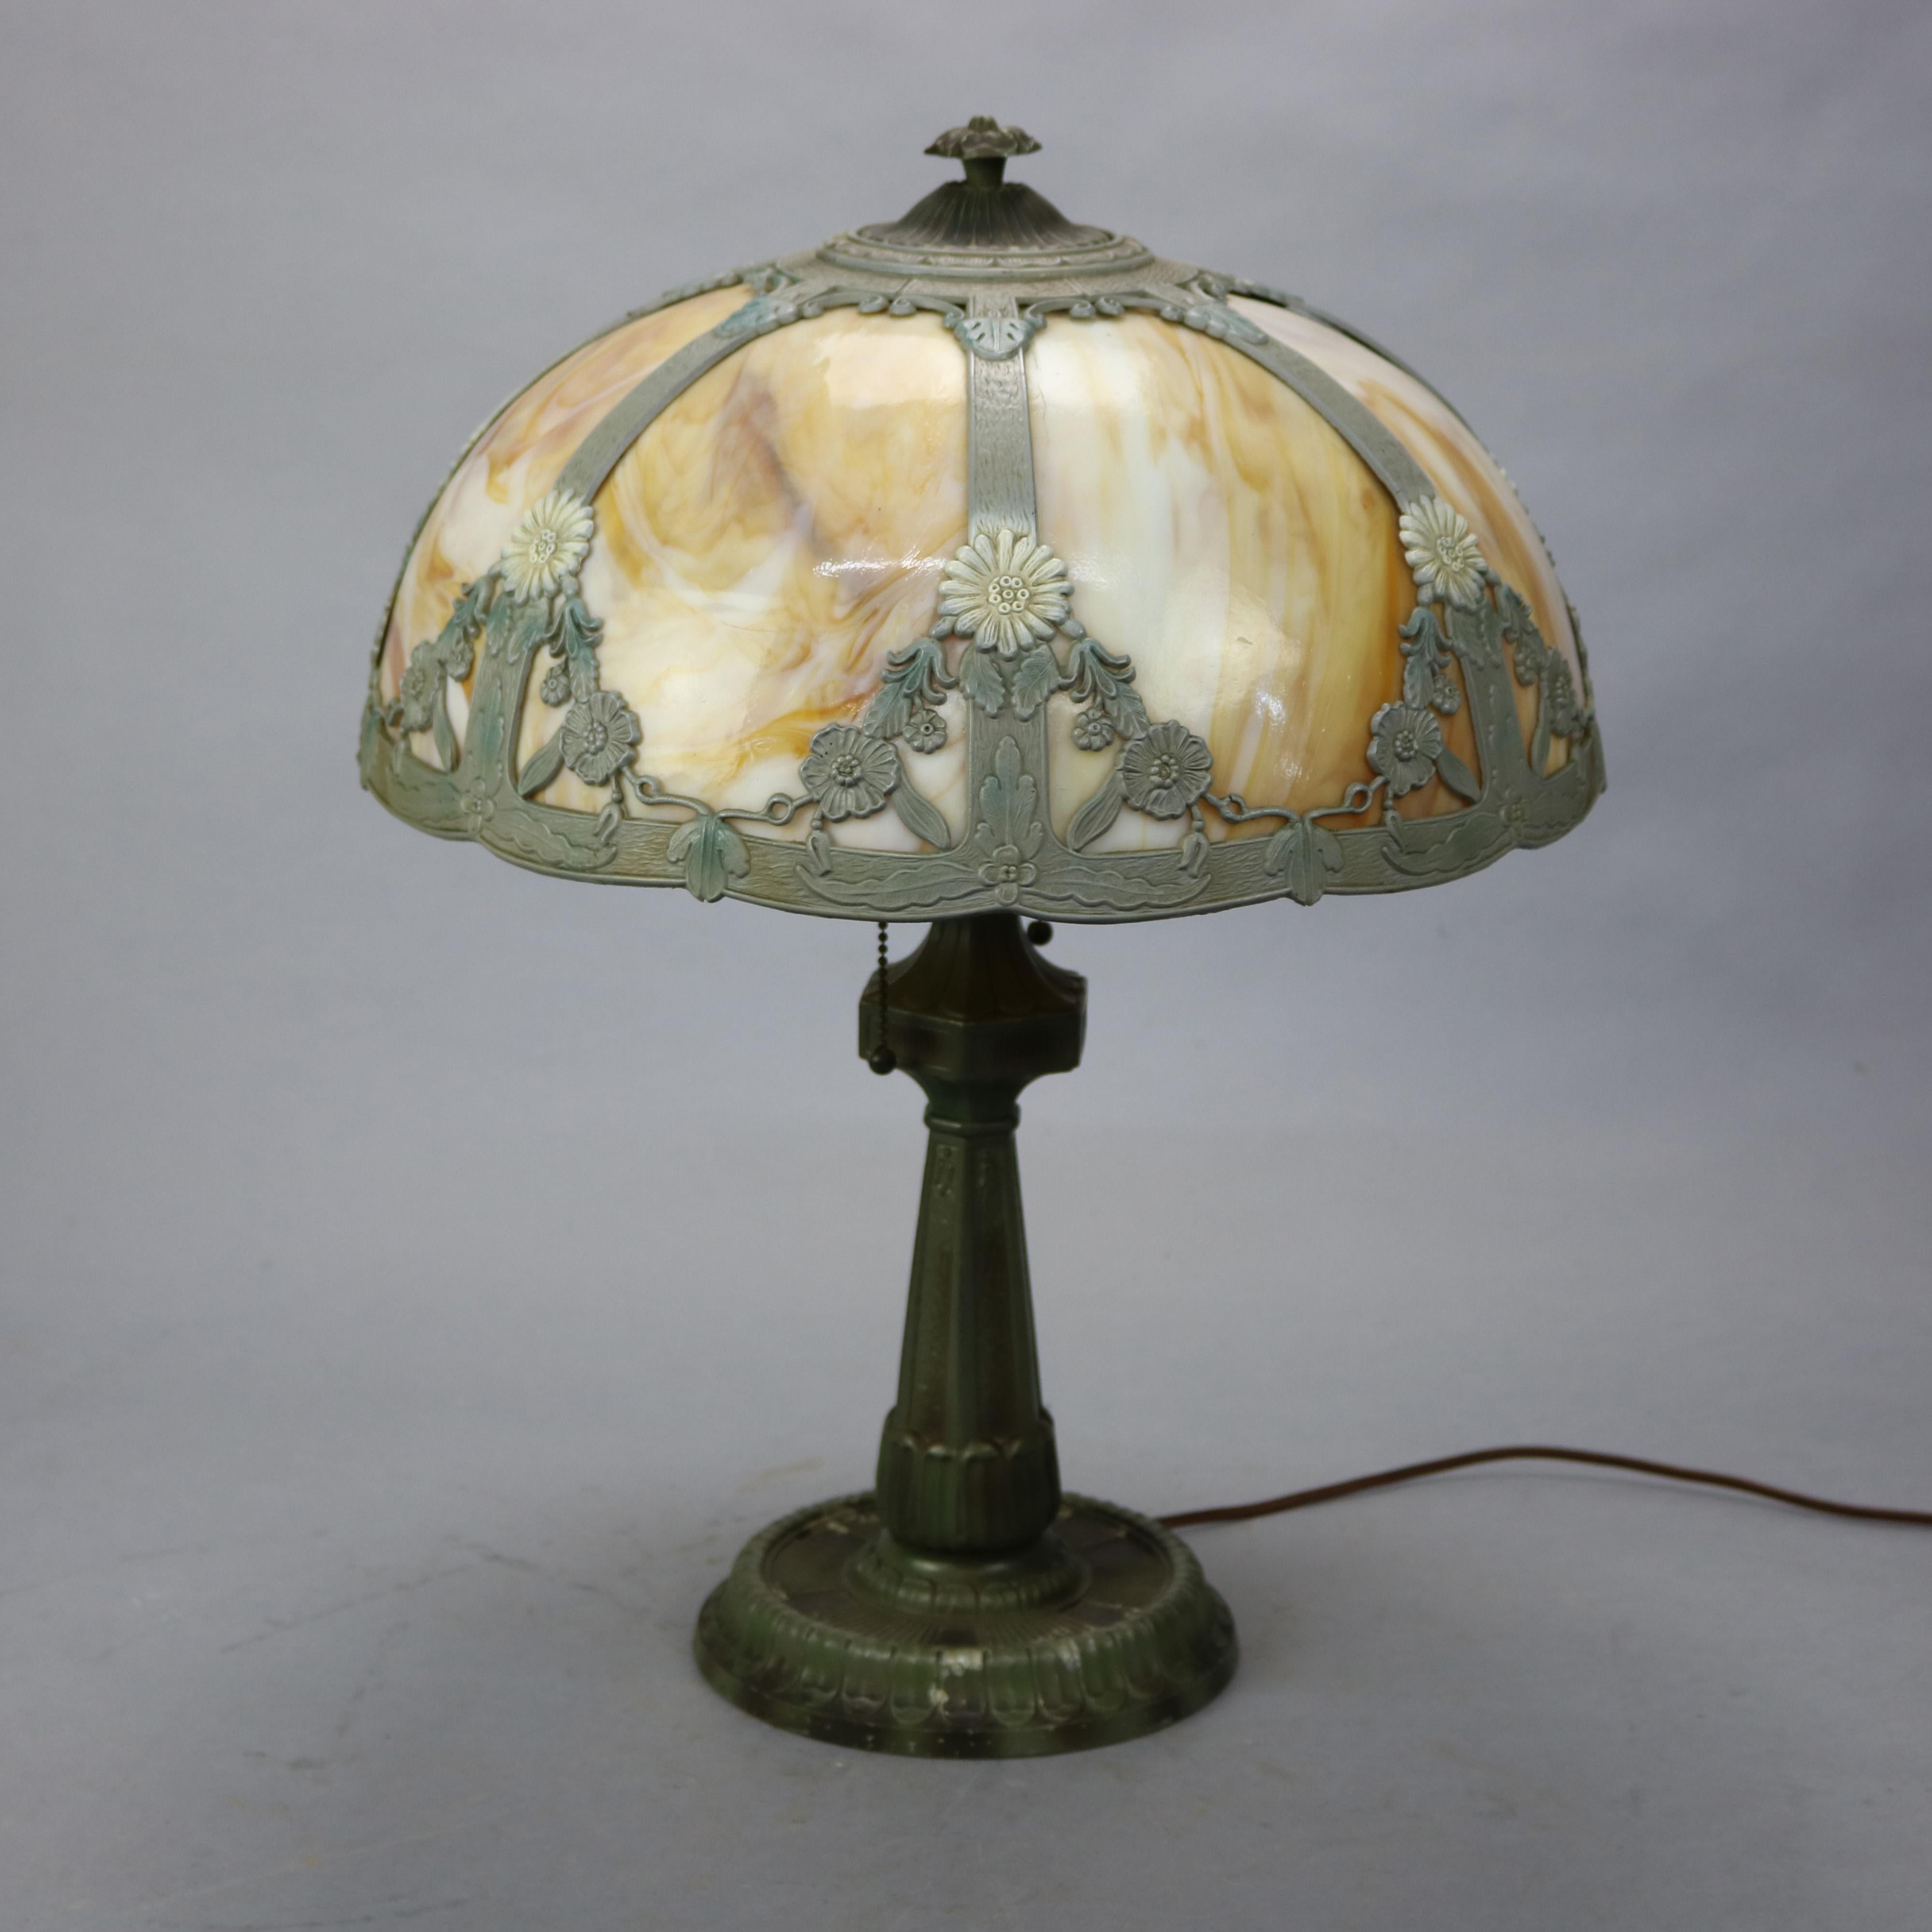 An antique Arts and Crafts table lamp in the manner of Bradley and Hubbard offers dome form shade with cast shade having stylized urn and foliate elements and housing bent slag glass panels over double socket cast metal base, c1920

Measures -